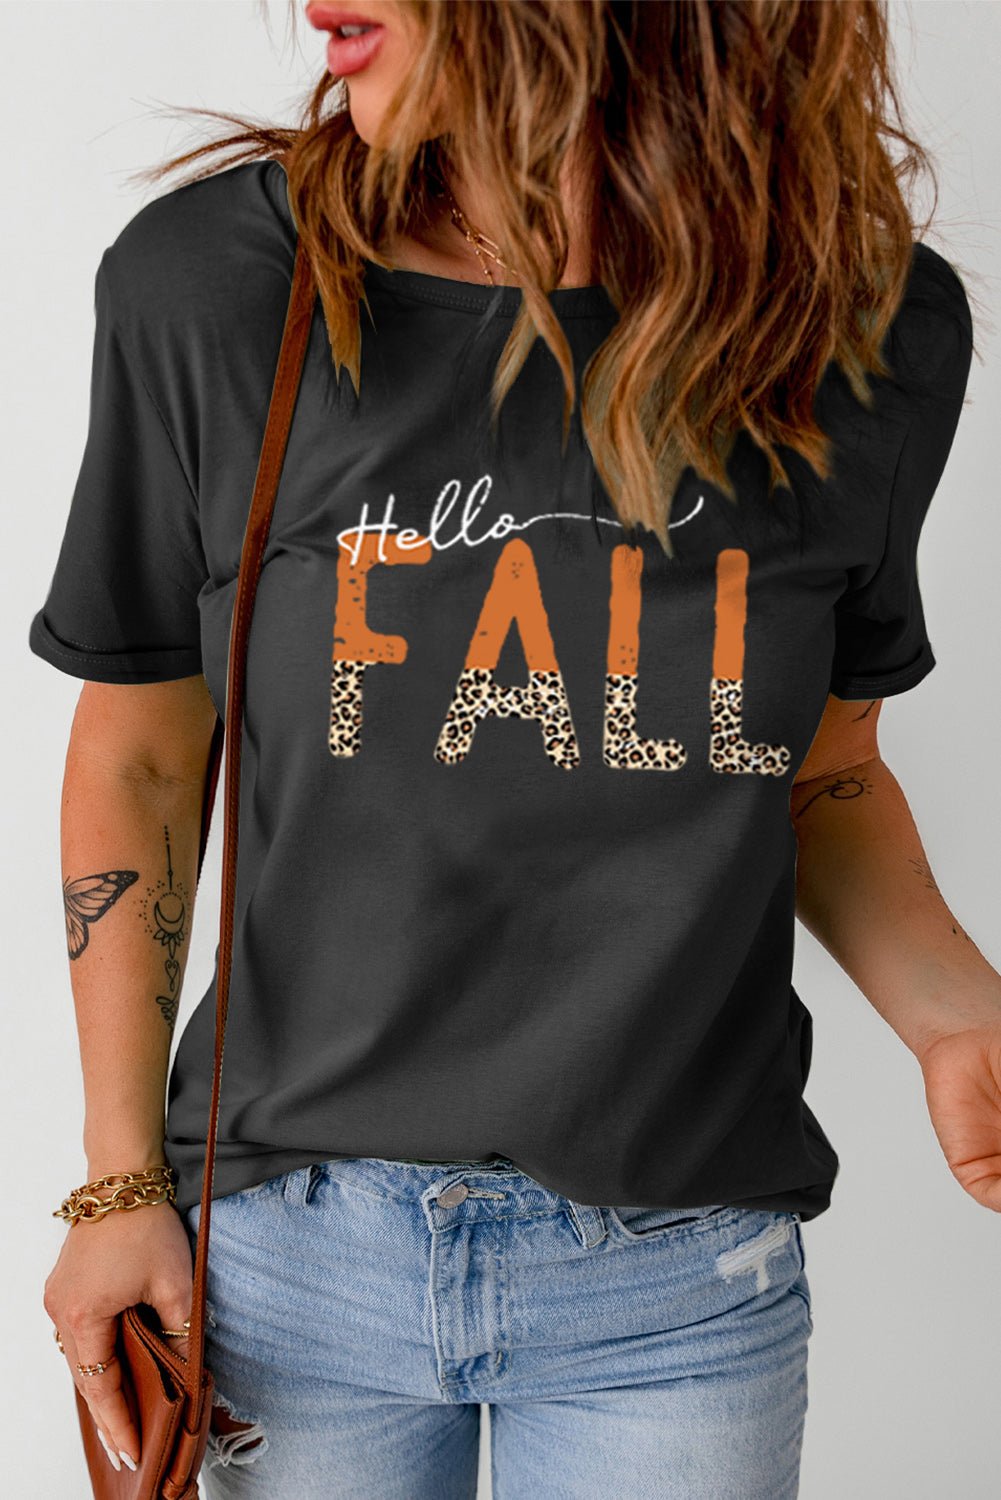 HELLO FALL Graphic Tee - Fashion Girl Online Store